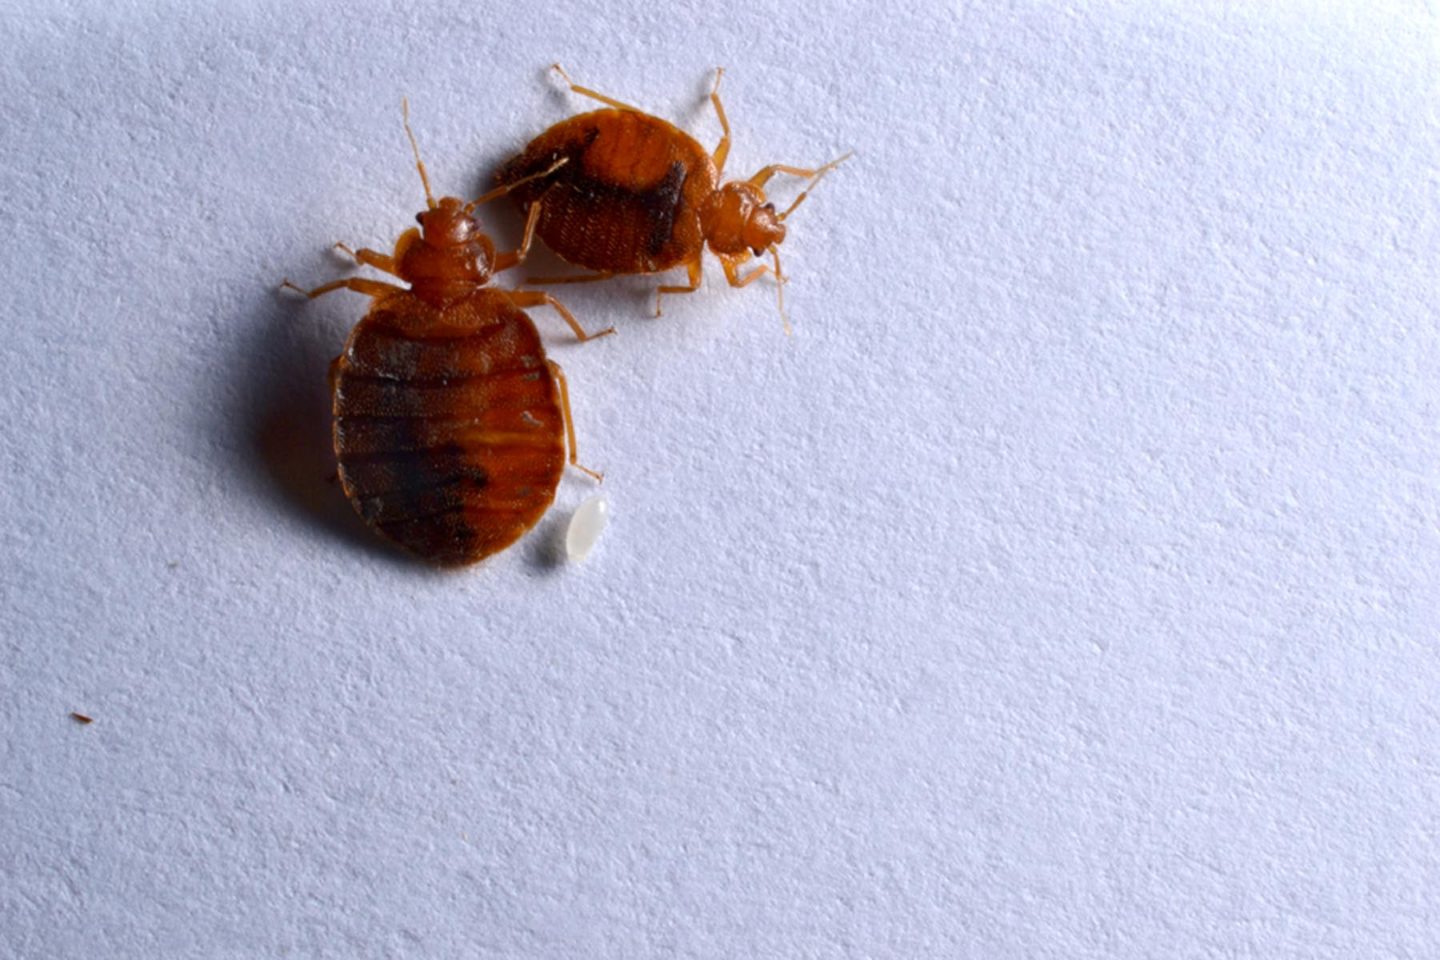 two_bed_bugs_one_egg_edited.jpg